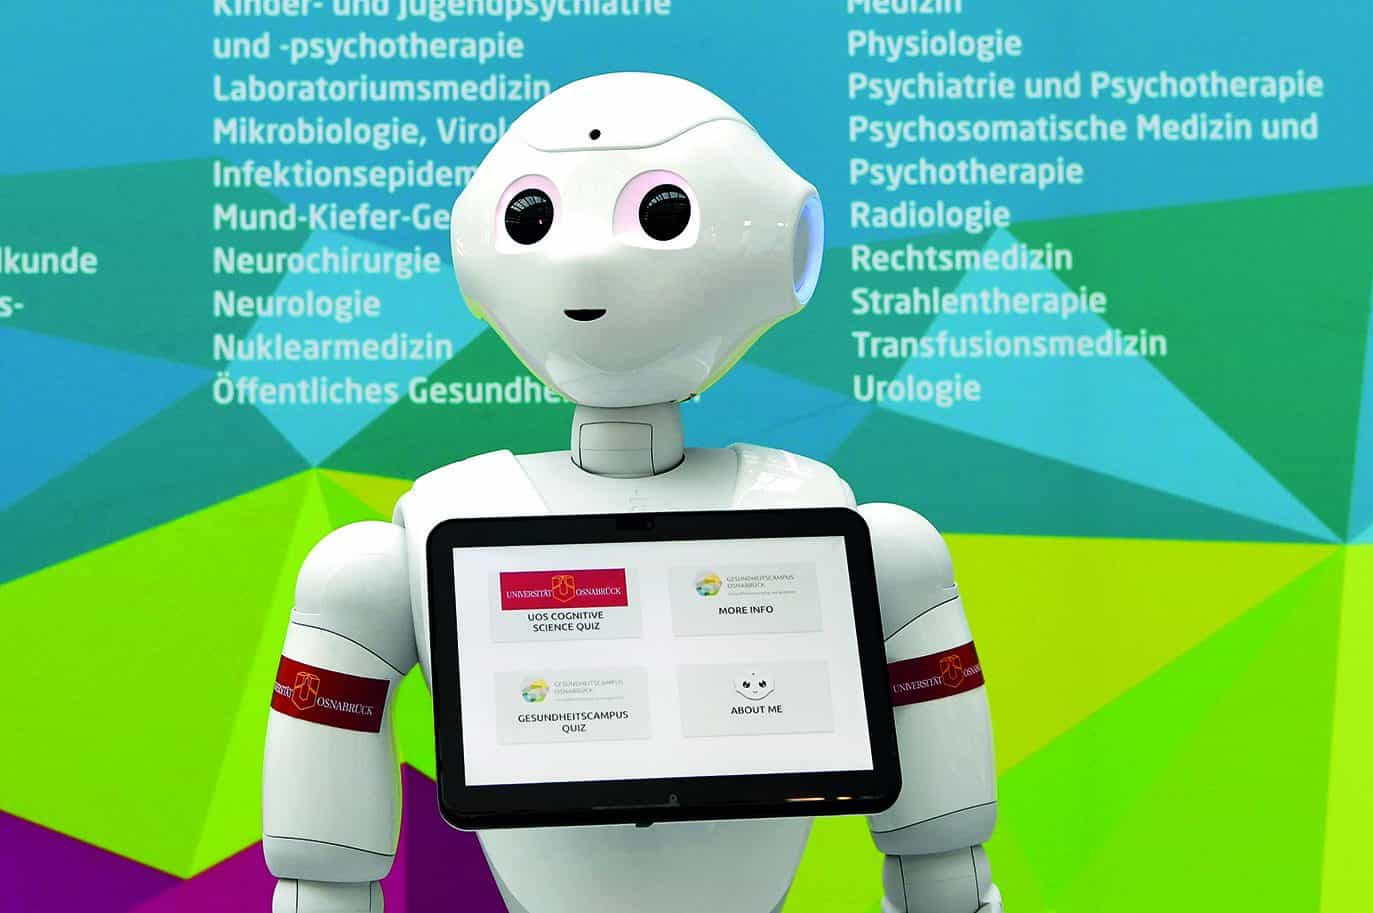 28 November 2018, Lower Saxony, Hannover: The humanoid robot "Lou" stands in front of a poster at the beginning of a press conference during the Digital Summit on Health. Among other things, the conference will deal with the future of telemedical treatment models. (to dpa "helper or scaremonger? - "Dr. Google" competes with doctors" from 28.11.2018) Photo by: Holger Hollemann/picture-alliance/dpa/AP Images